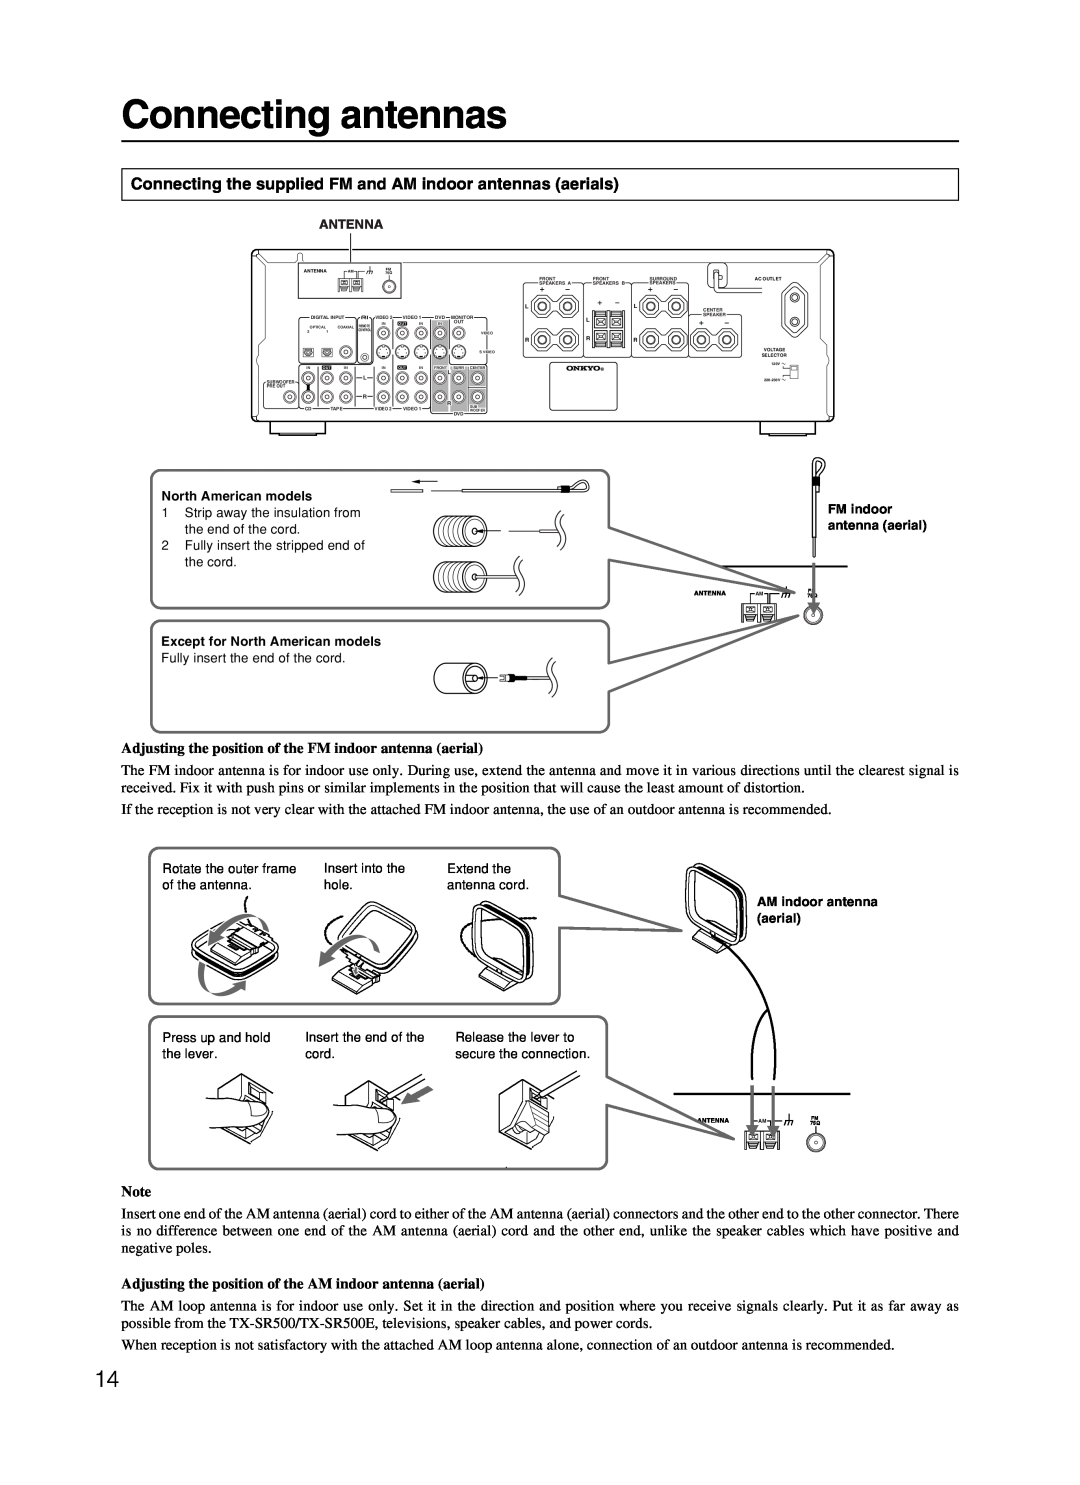 Onkyo TX-SR500 appendix Connecting antennas, Antenna, Except for North American models, FM indoor antenna aerial 